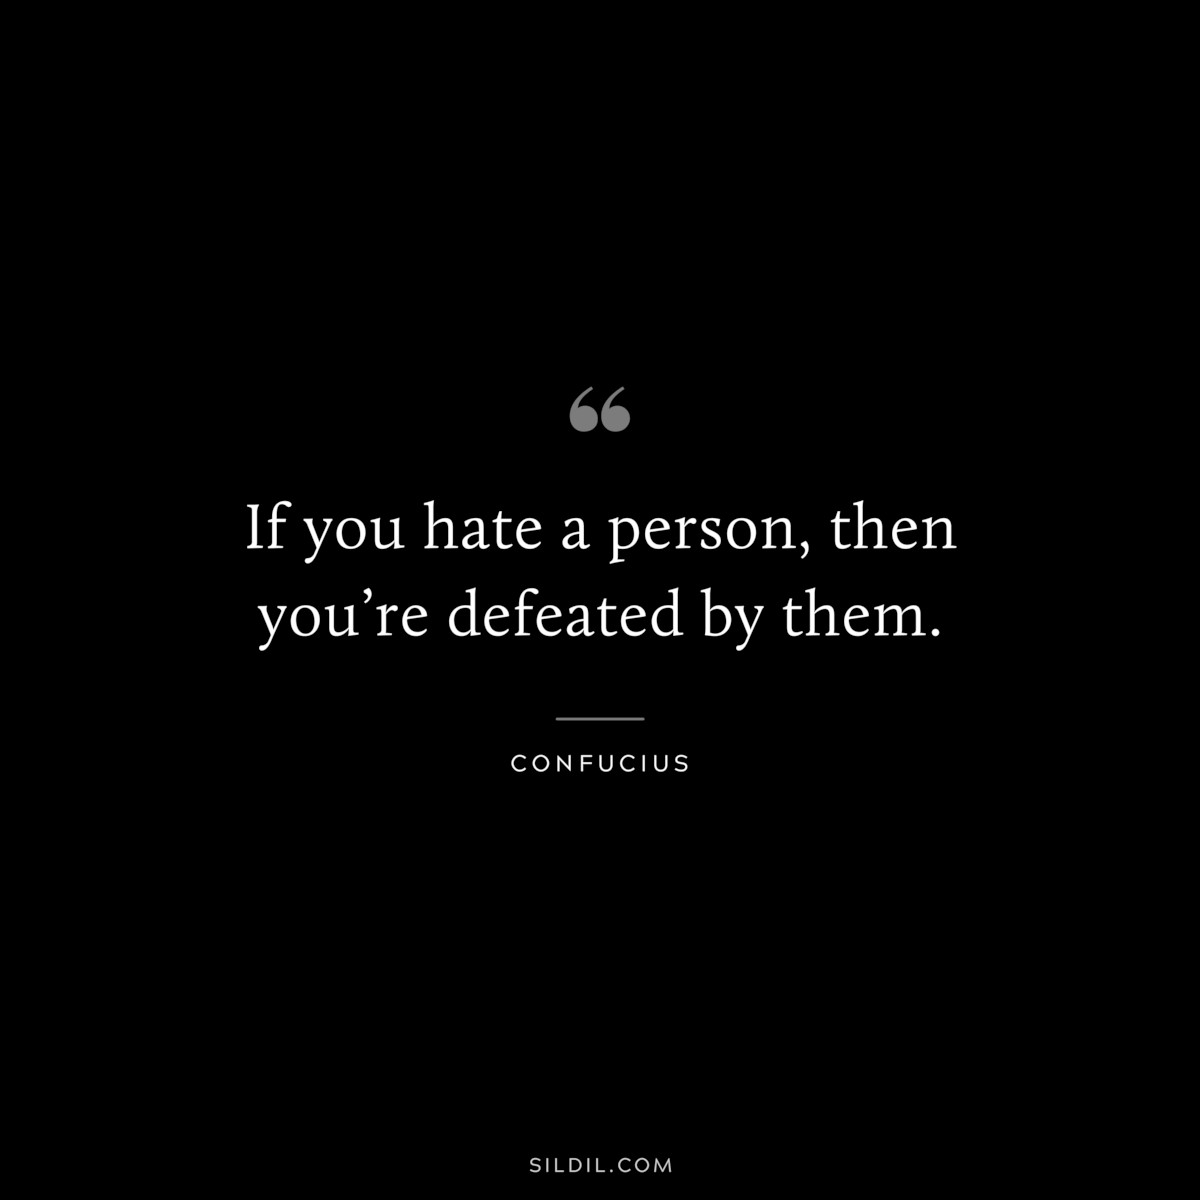 If you hate a person, then you’re defeated by them. ― Confucius